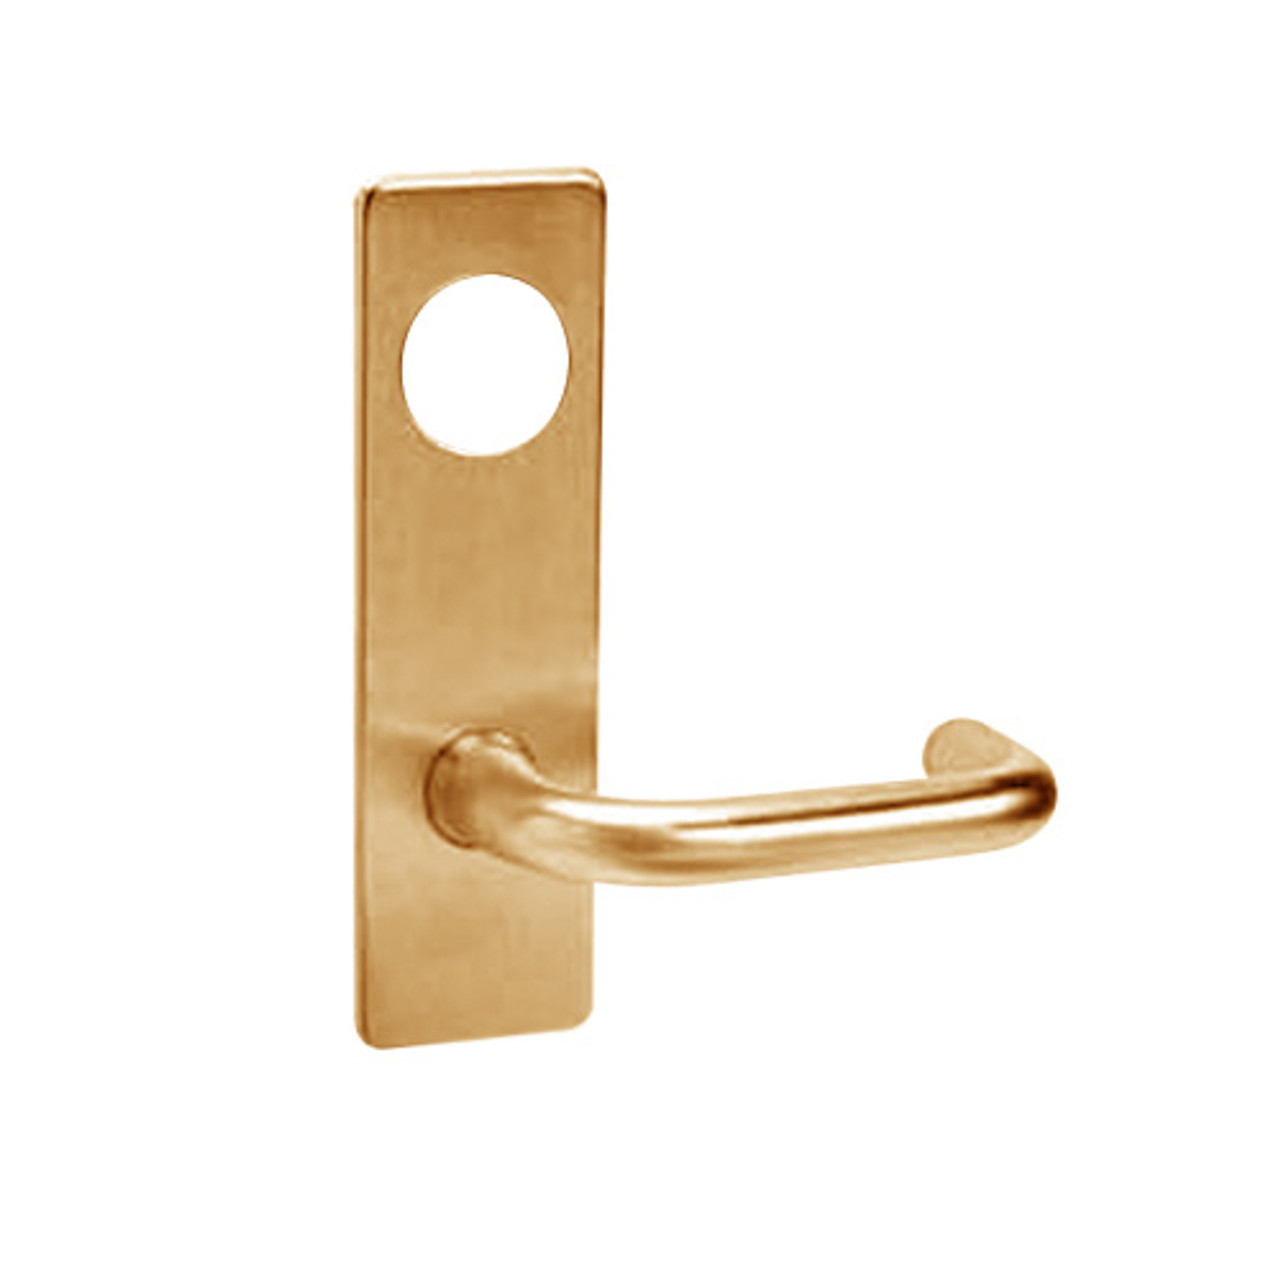 ML2056-LWP-612-CL7 Corbin Russwin ML2000 Series IC 7-Pin Less Core Mortise Classroom Locksets with Lustra Lever in Satin Bronze